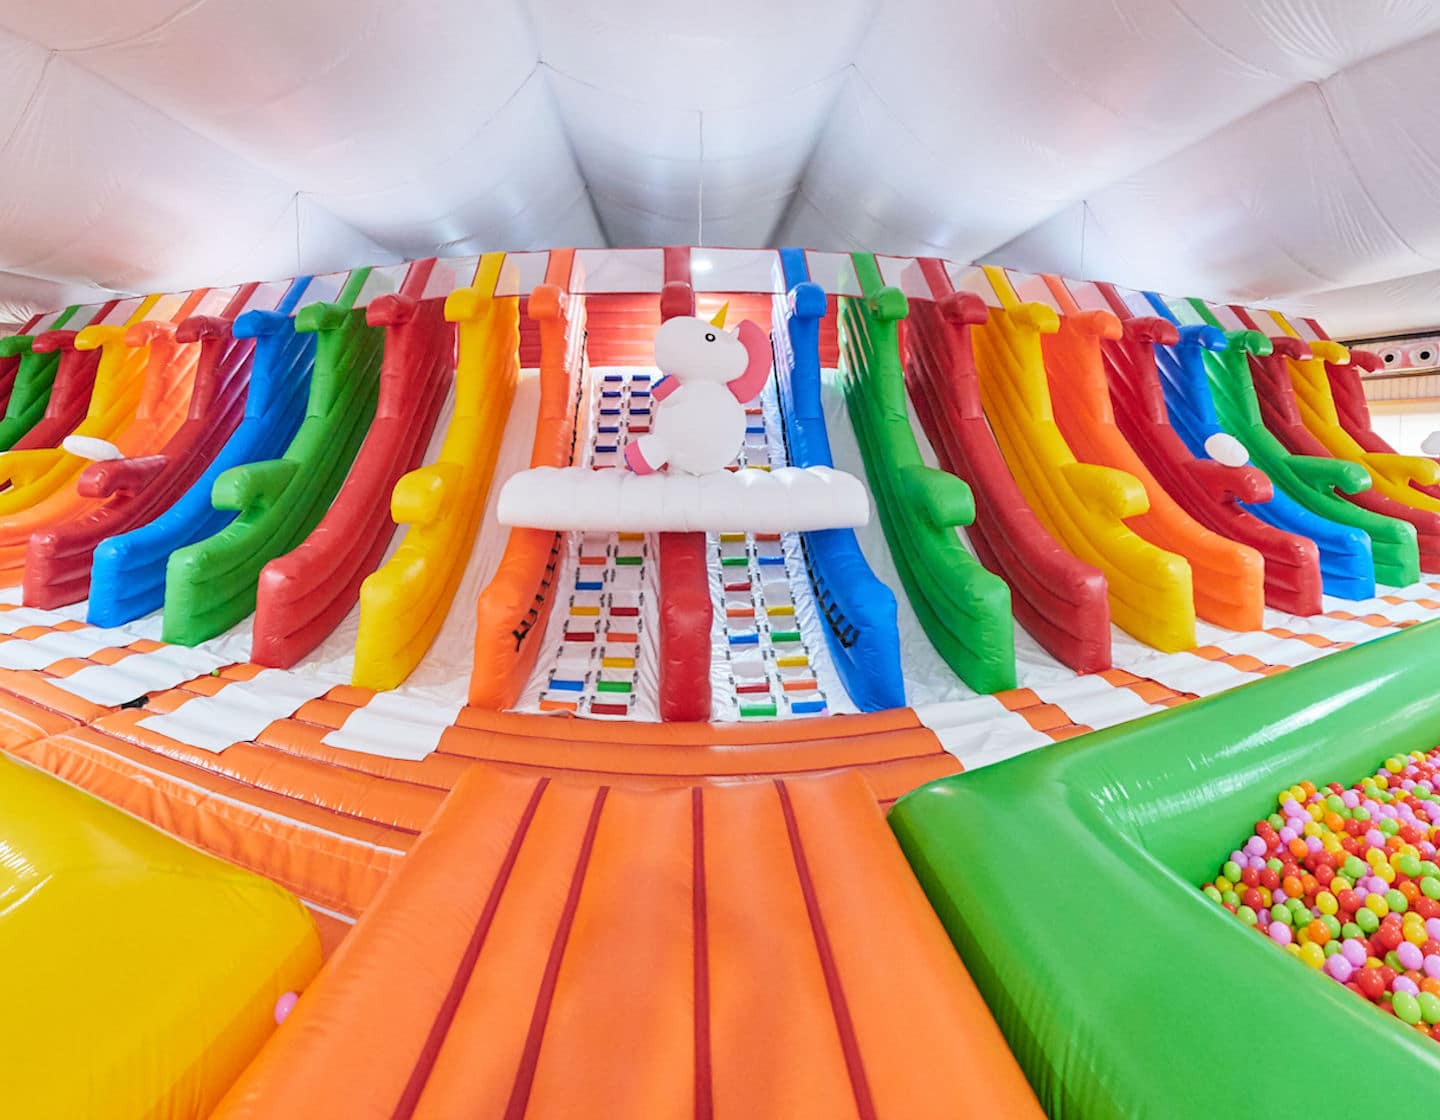 Bouncy Paradise inflatable indoor playground in Singapore